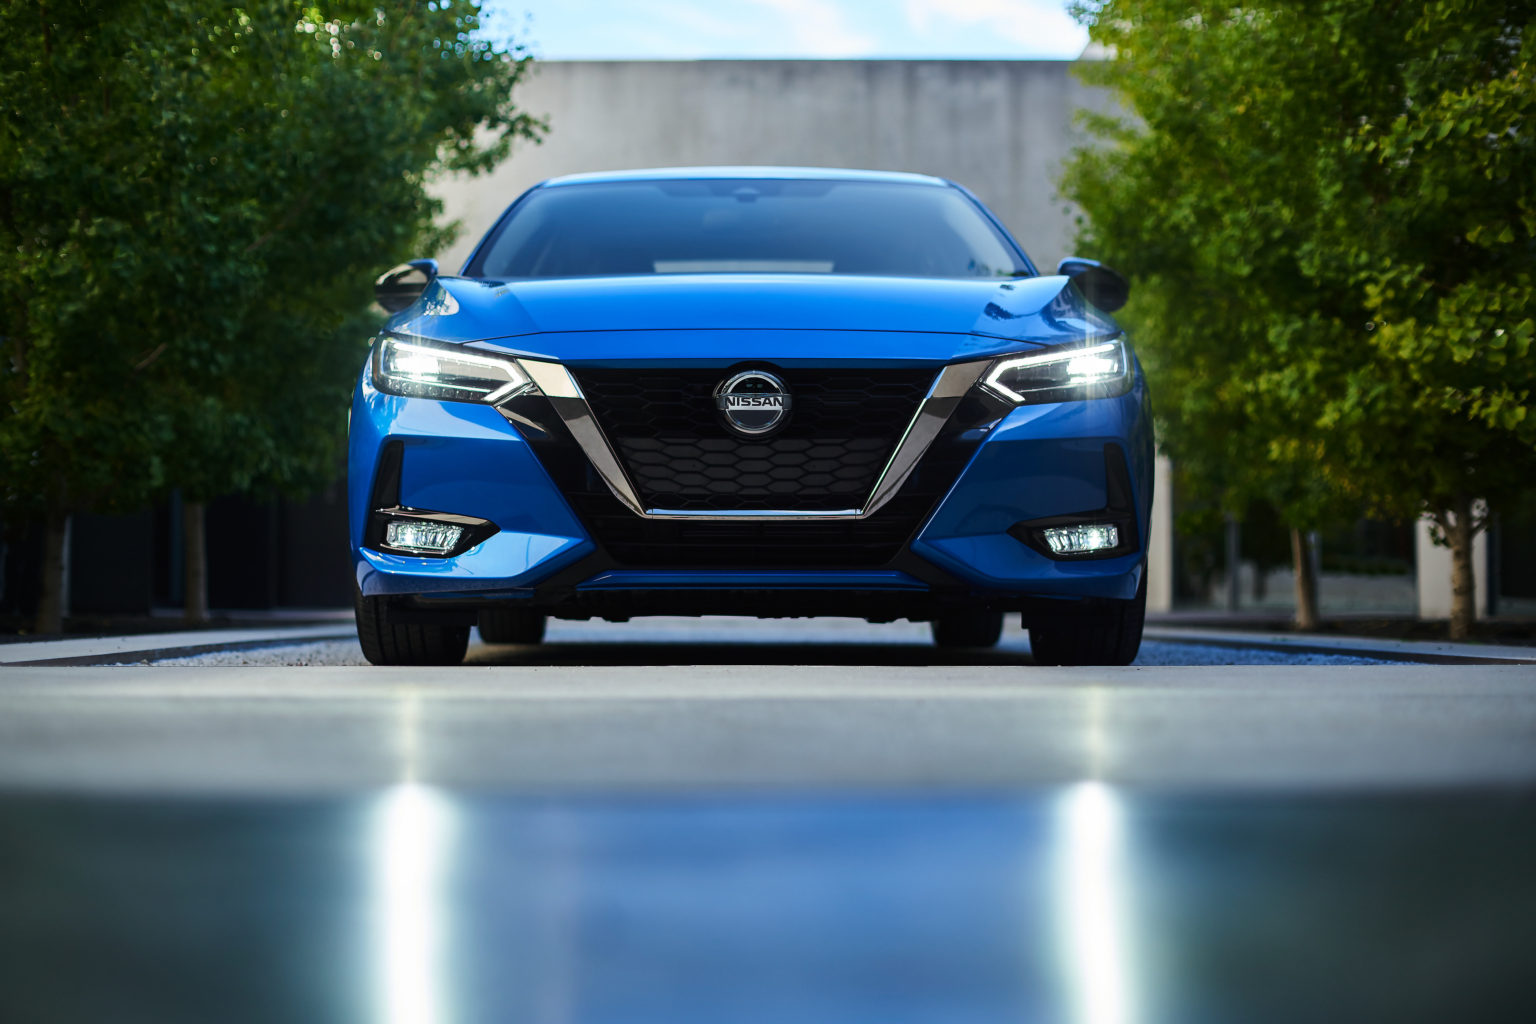 The Nissan Sentra was completely redesigned for the 2020 model year.